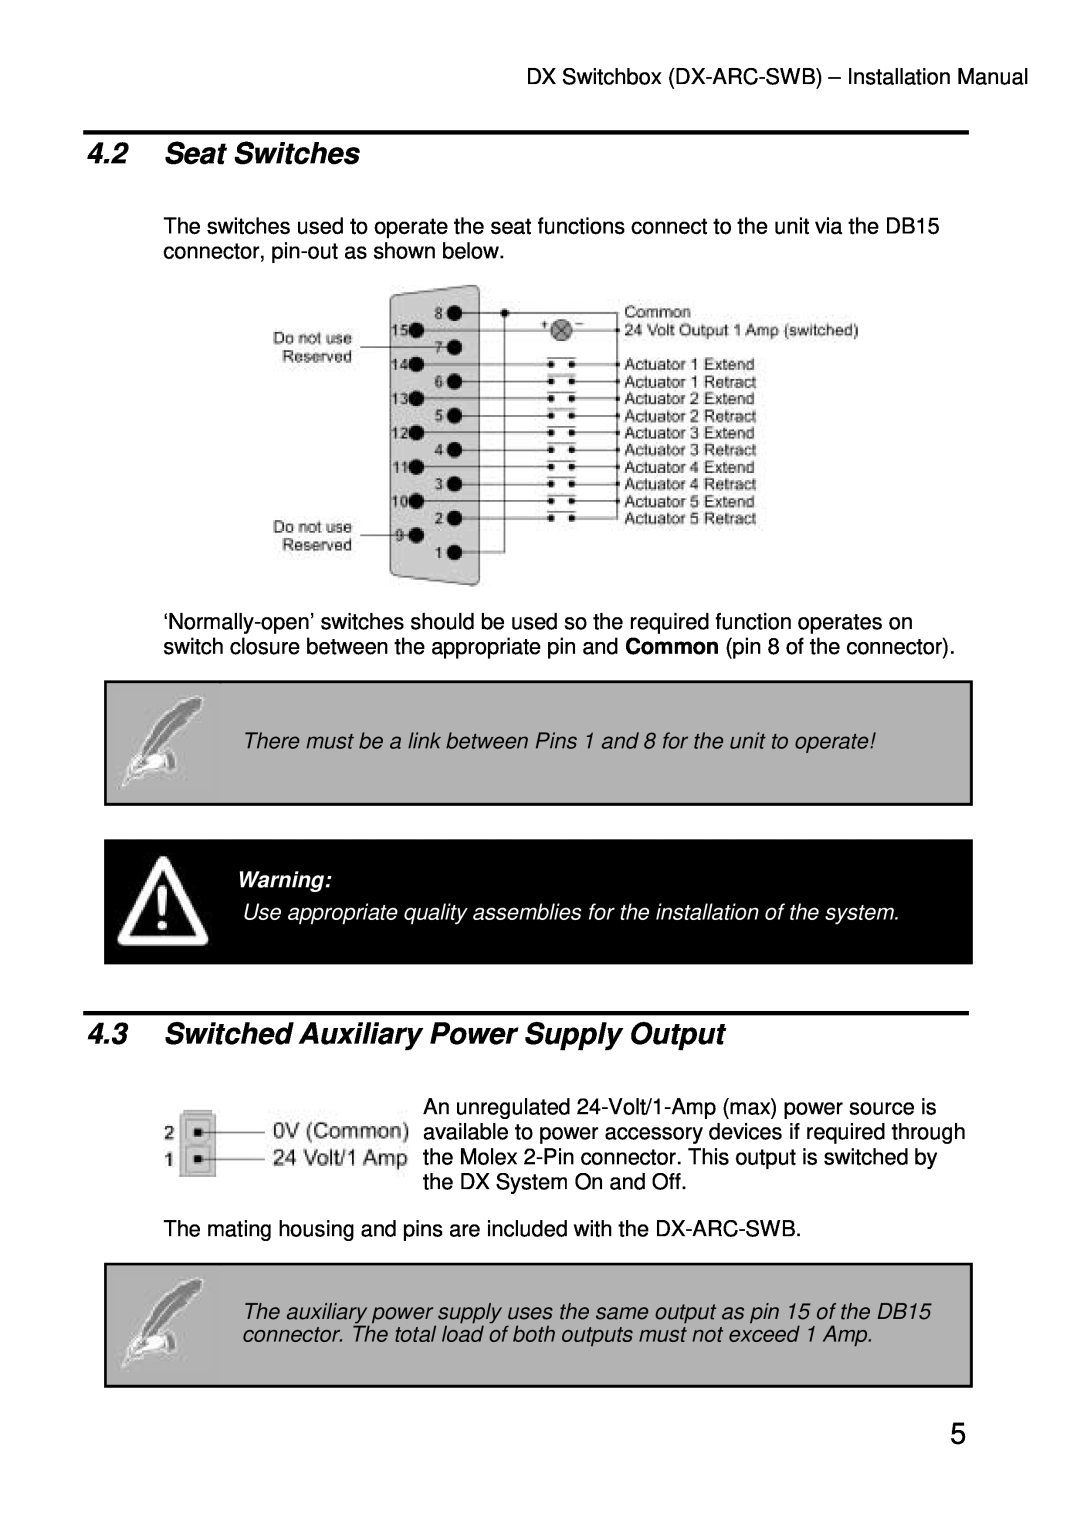 Dynamic Distributors DX-ARC-SWB installation manual Seat Switches, Switched Auxiliary Power Supply Output 